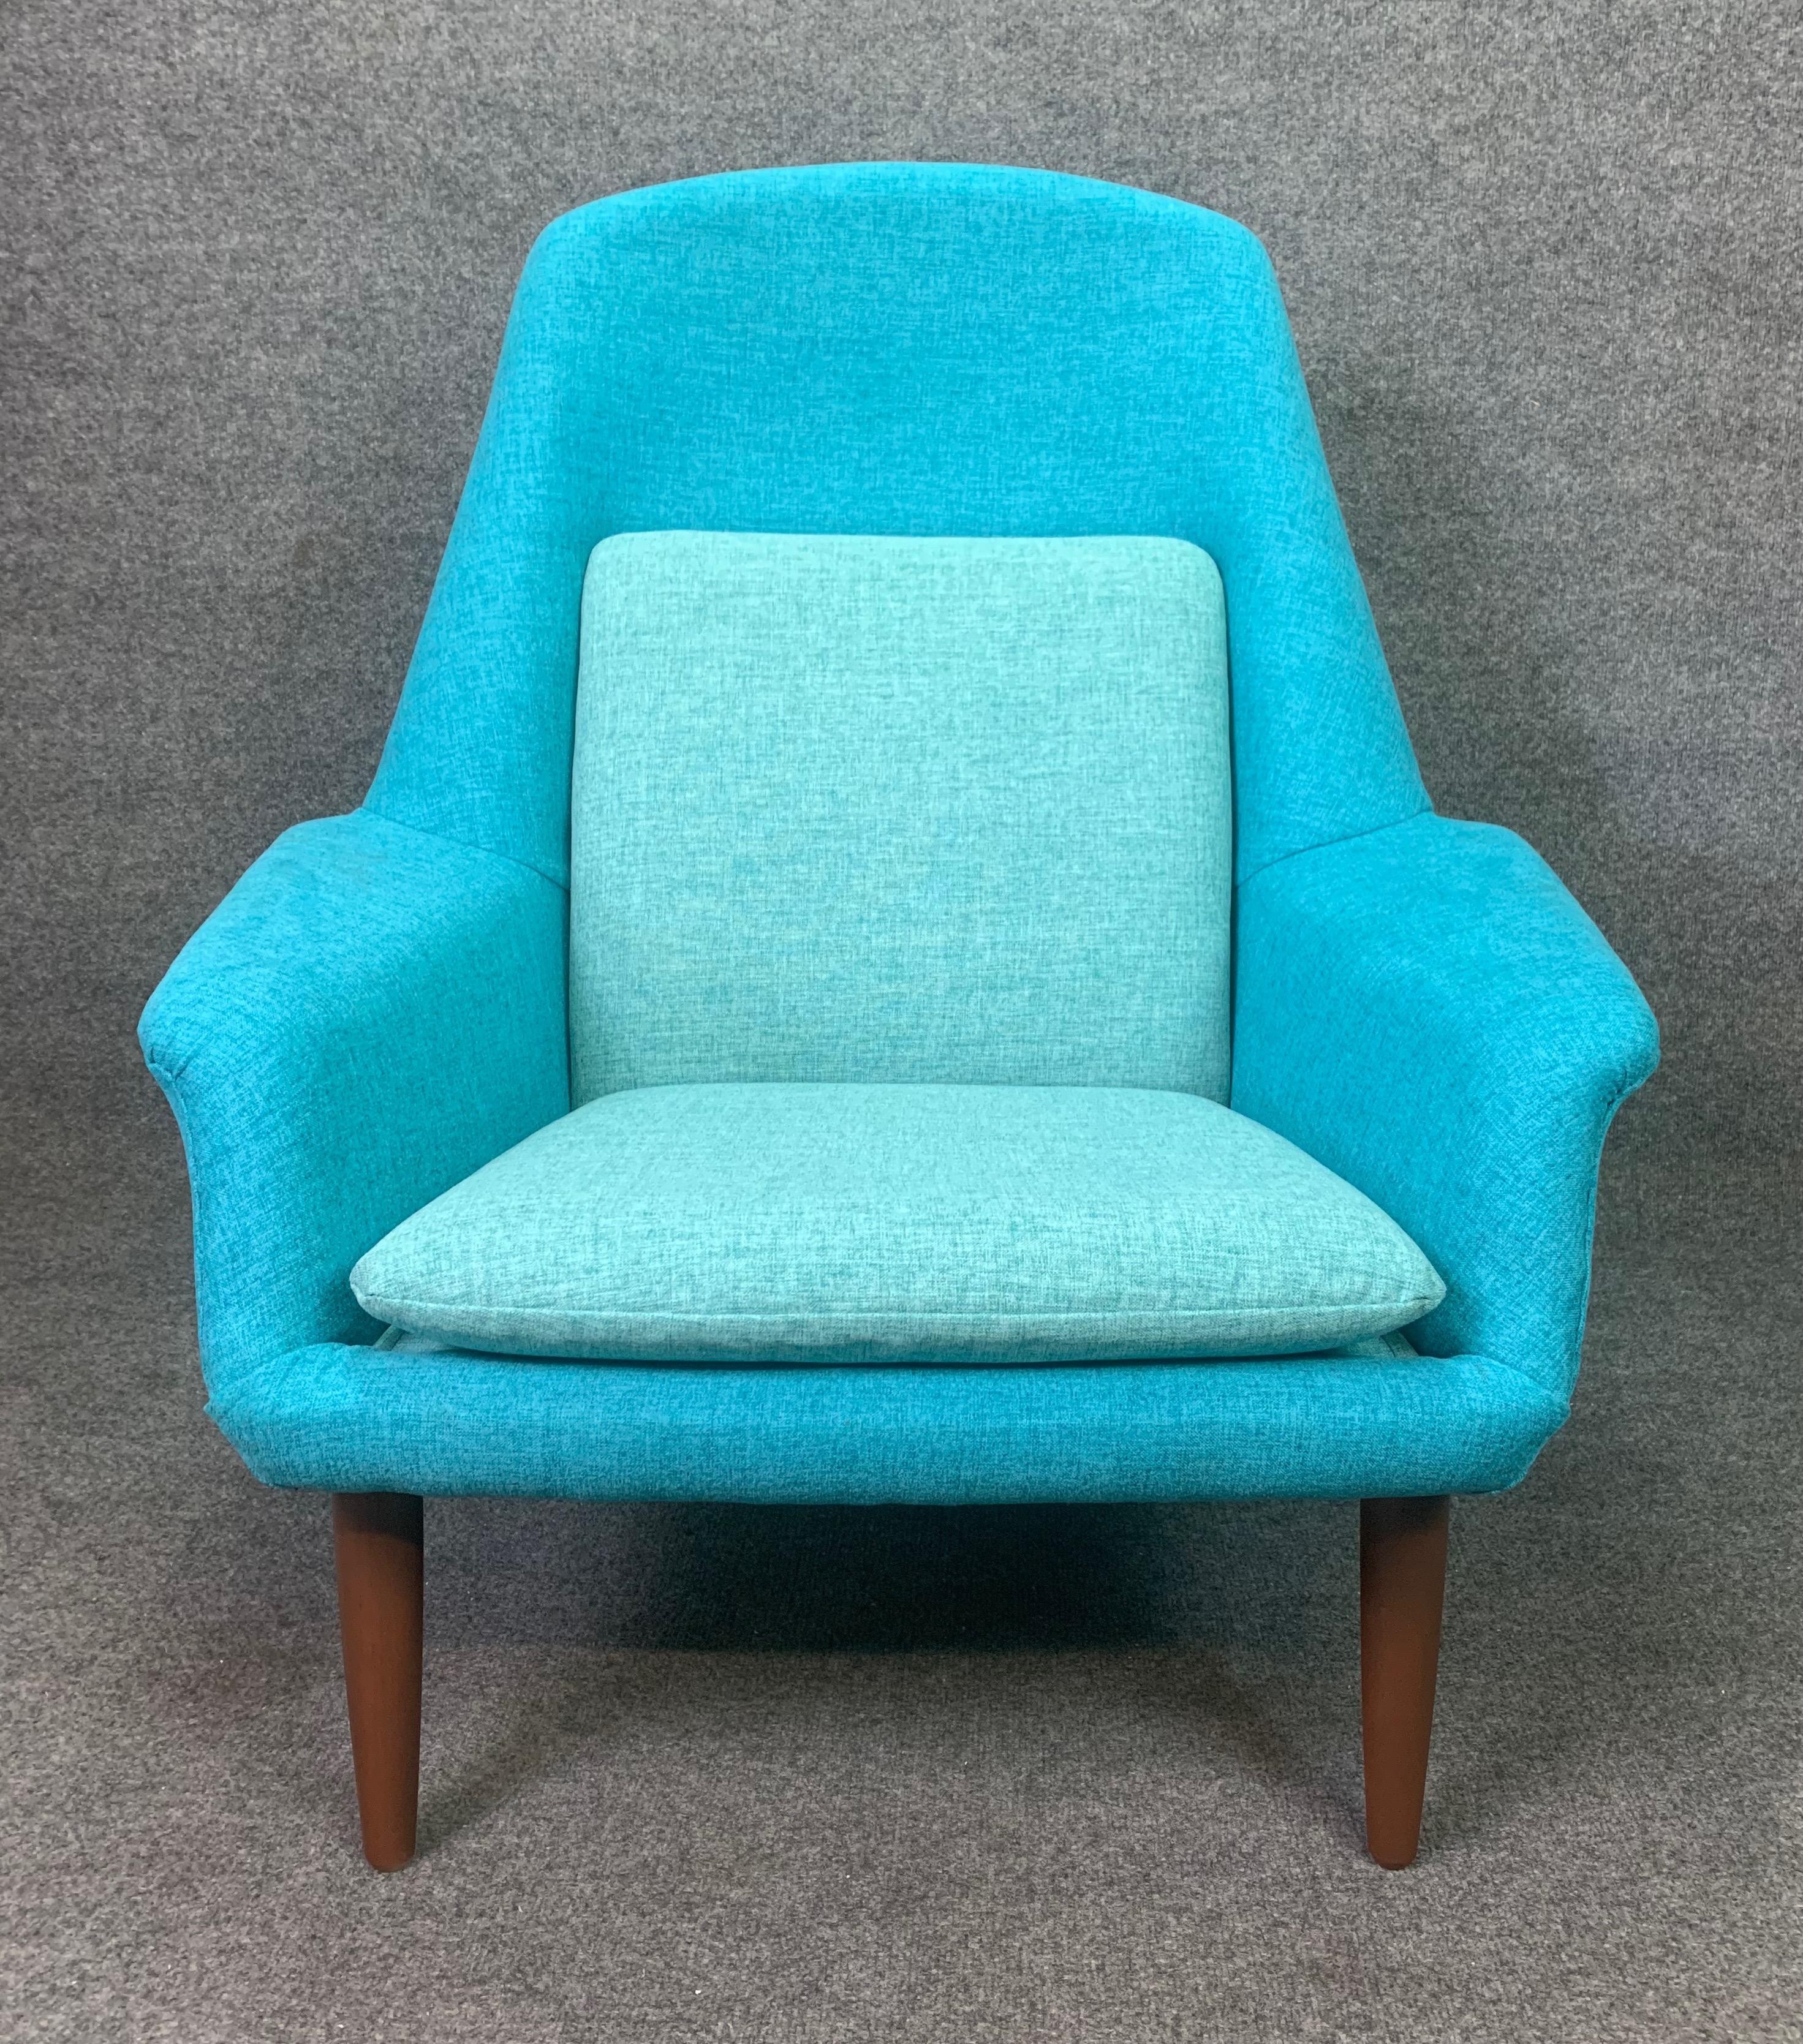 Vintage Scandinavian Mid-Century Modern Lounge Chair by Broderna Anderssons For Sale 2